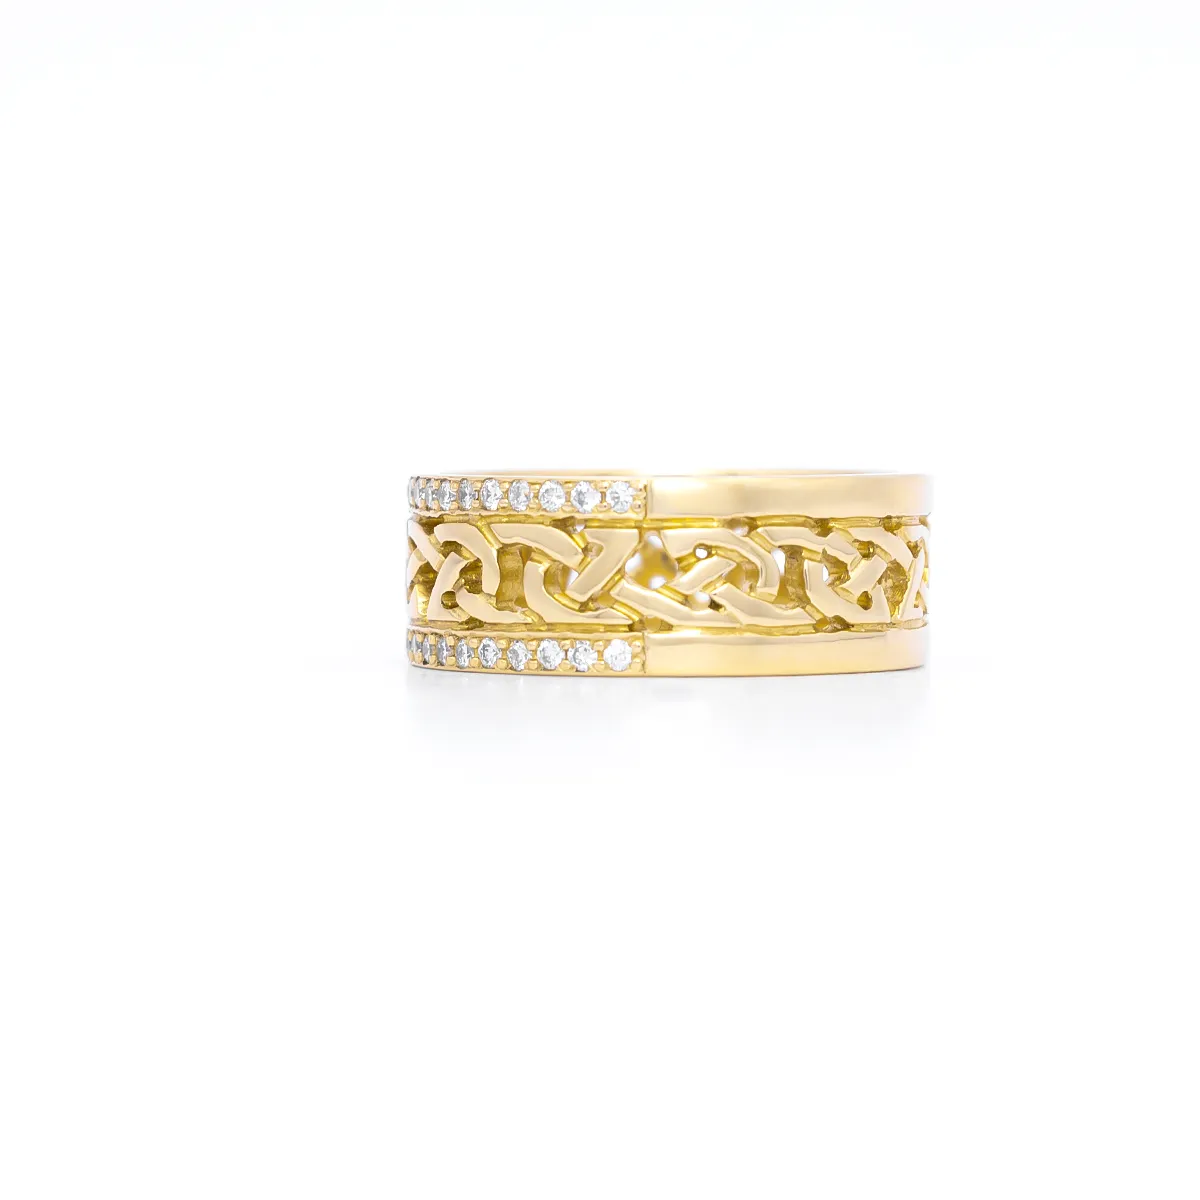 IJCR0034 Yellow Gold Celtic Ring With Diamonds 3